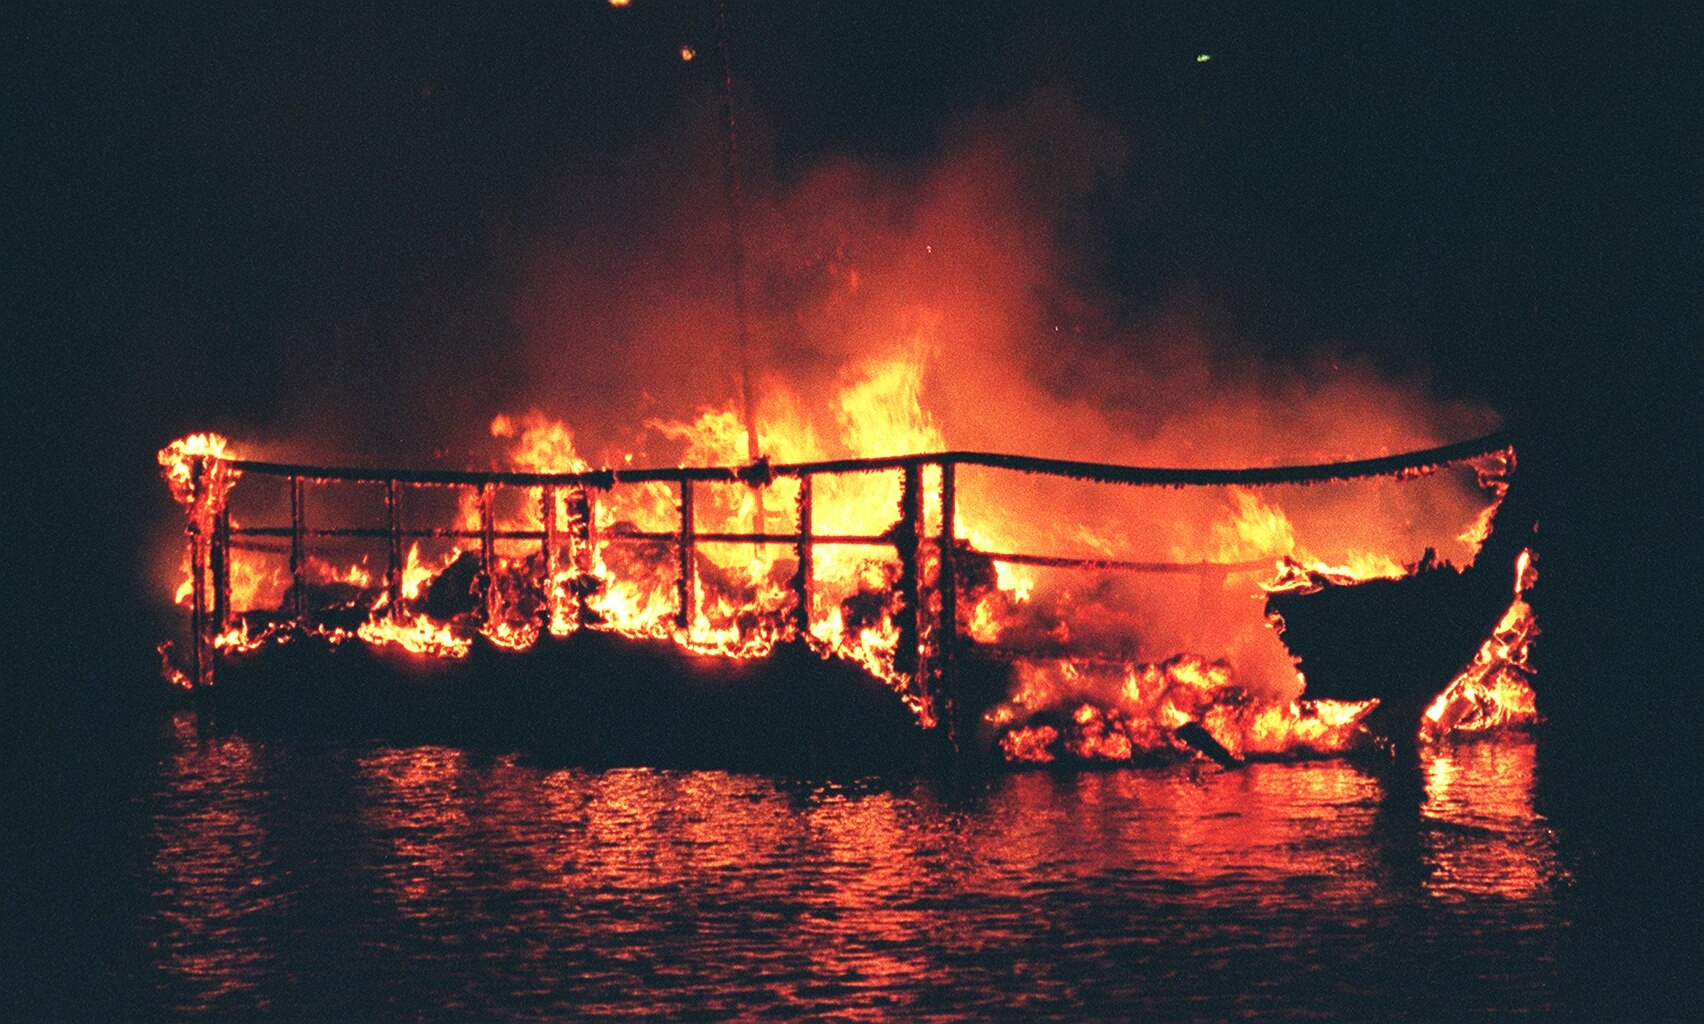 A photo of the boat burning ceremony in York 